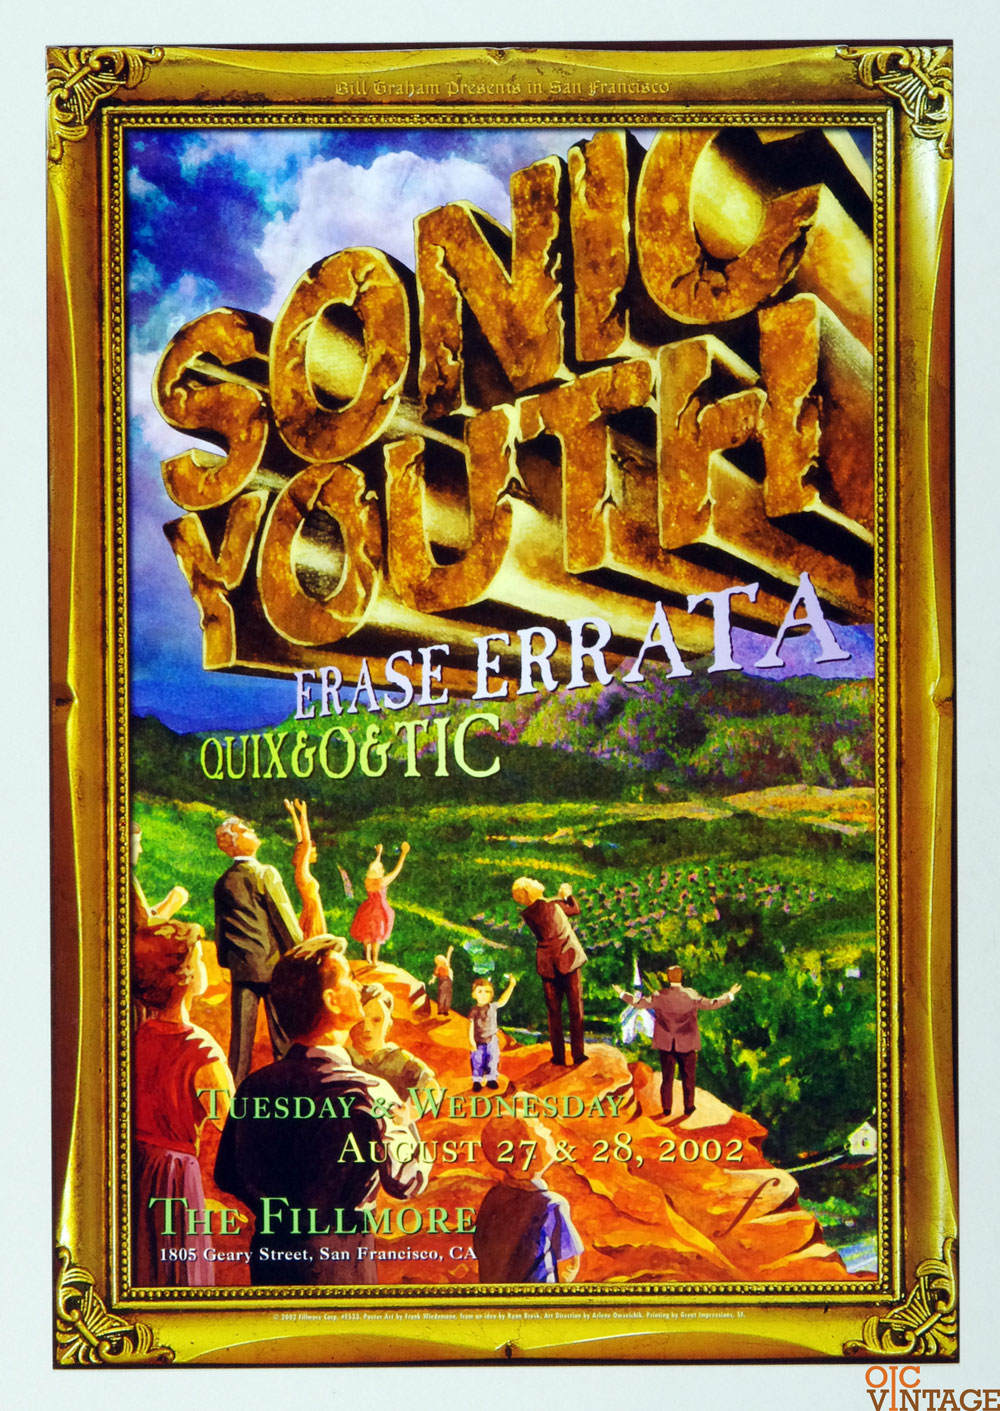 Sonic Youth Poster 2002 Aug 27 New Fillmore San Francisco